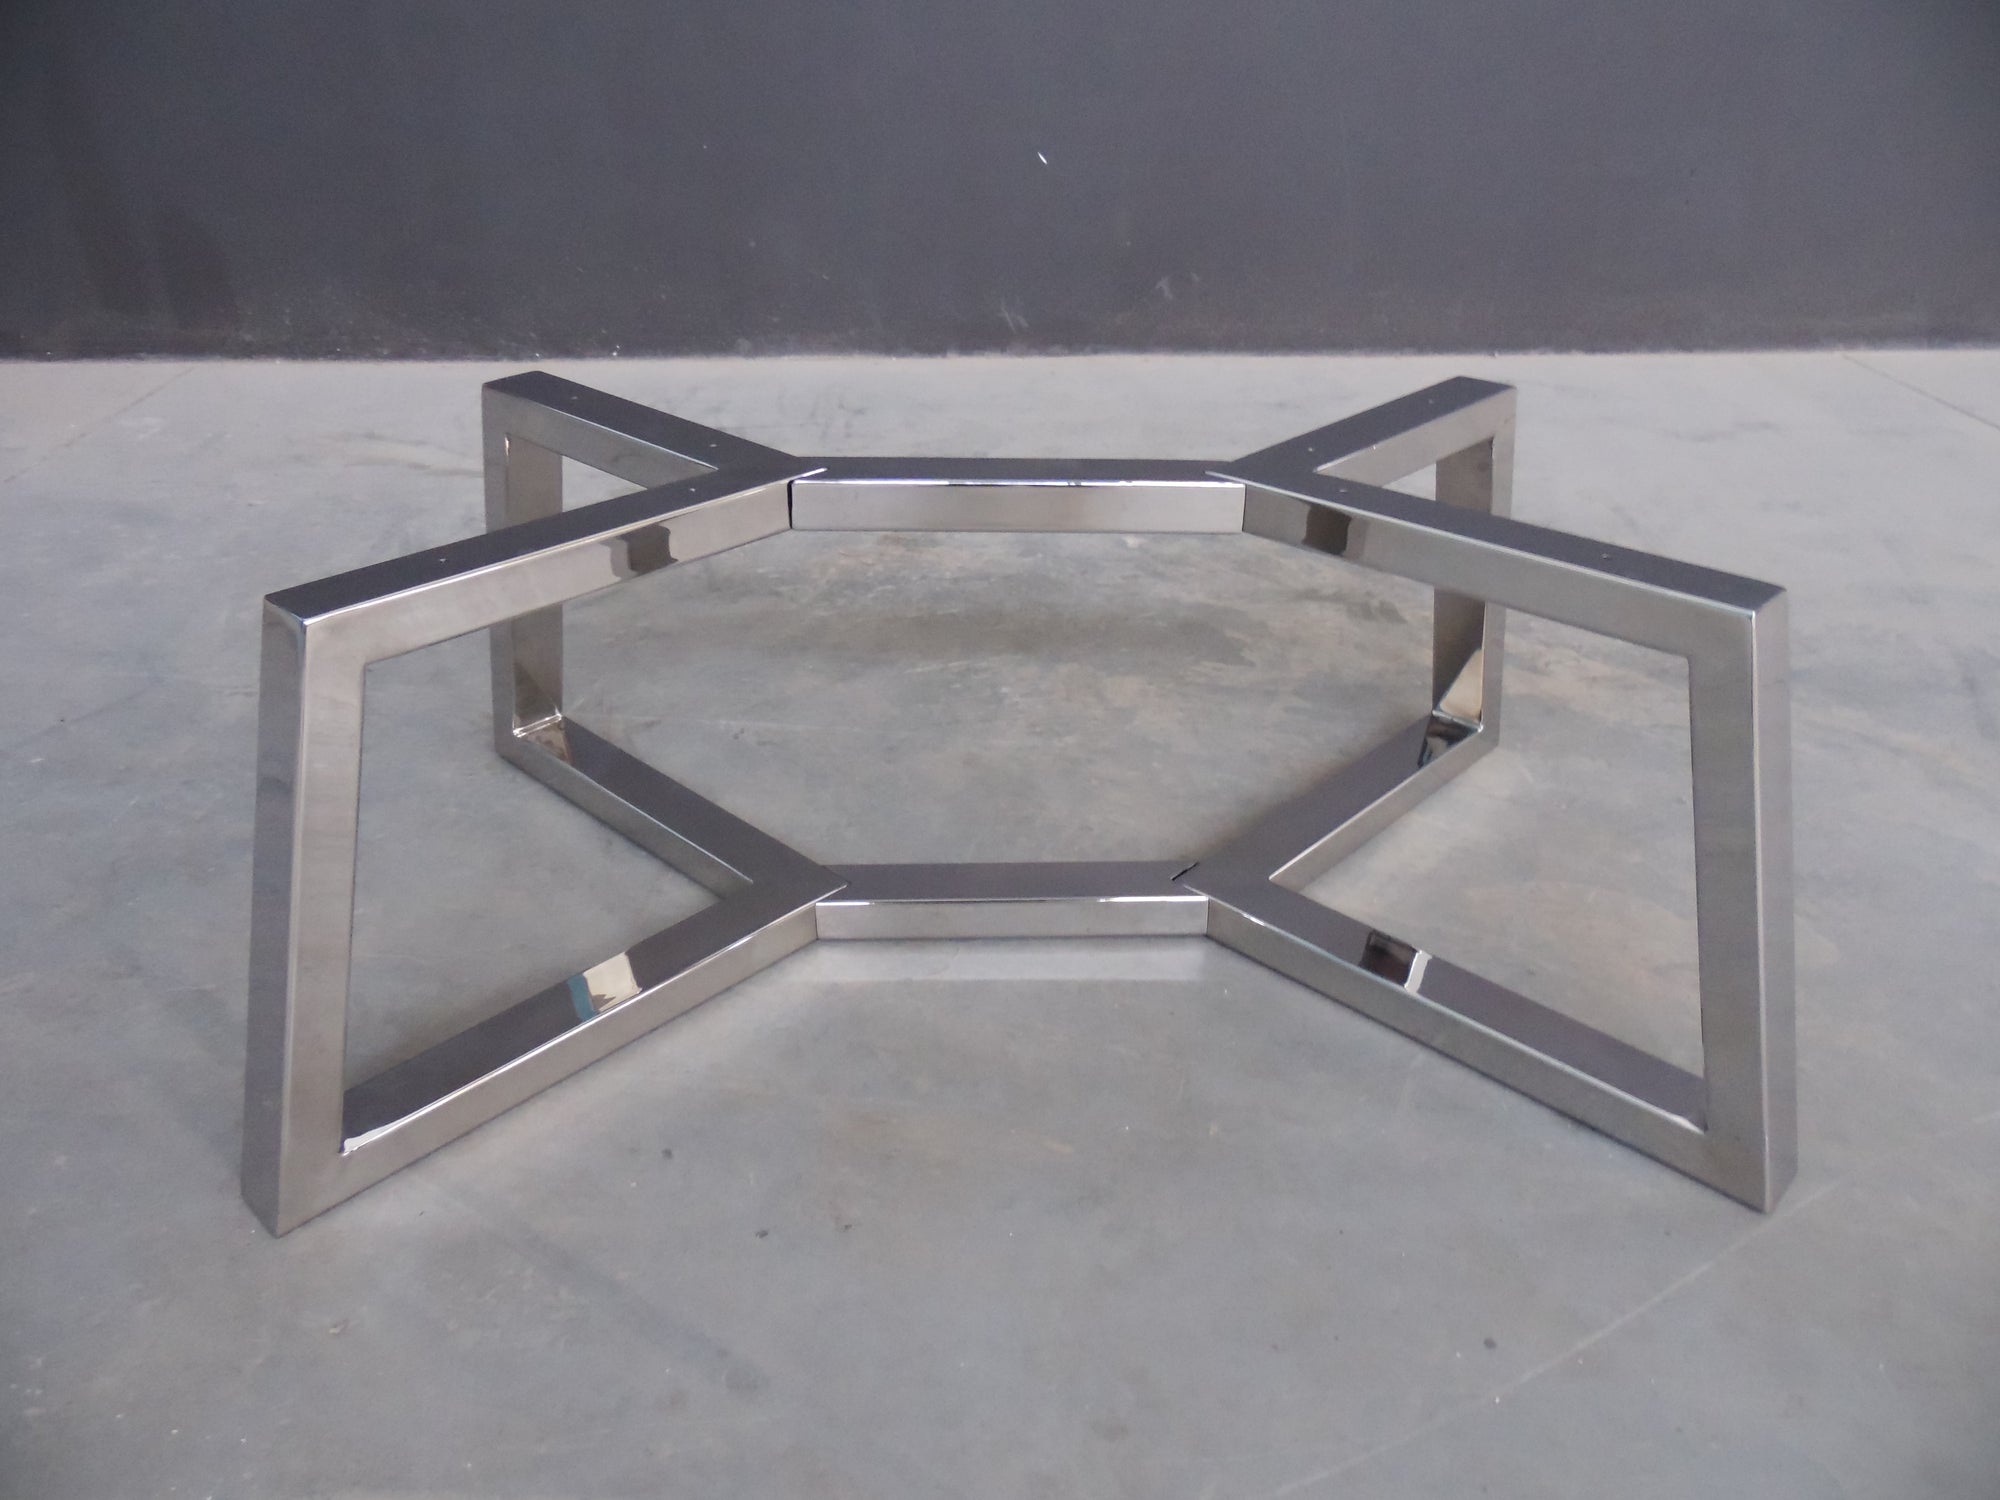 Trapezoid Metal STAINLESS STEEL STURDY Coffee Table Bases | GOKA C2